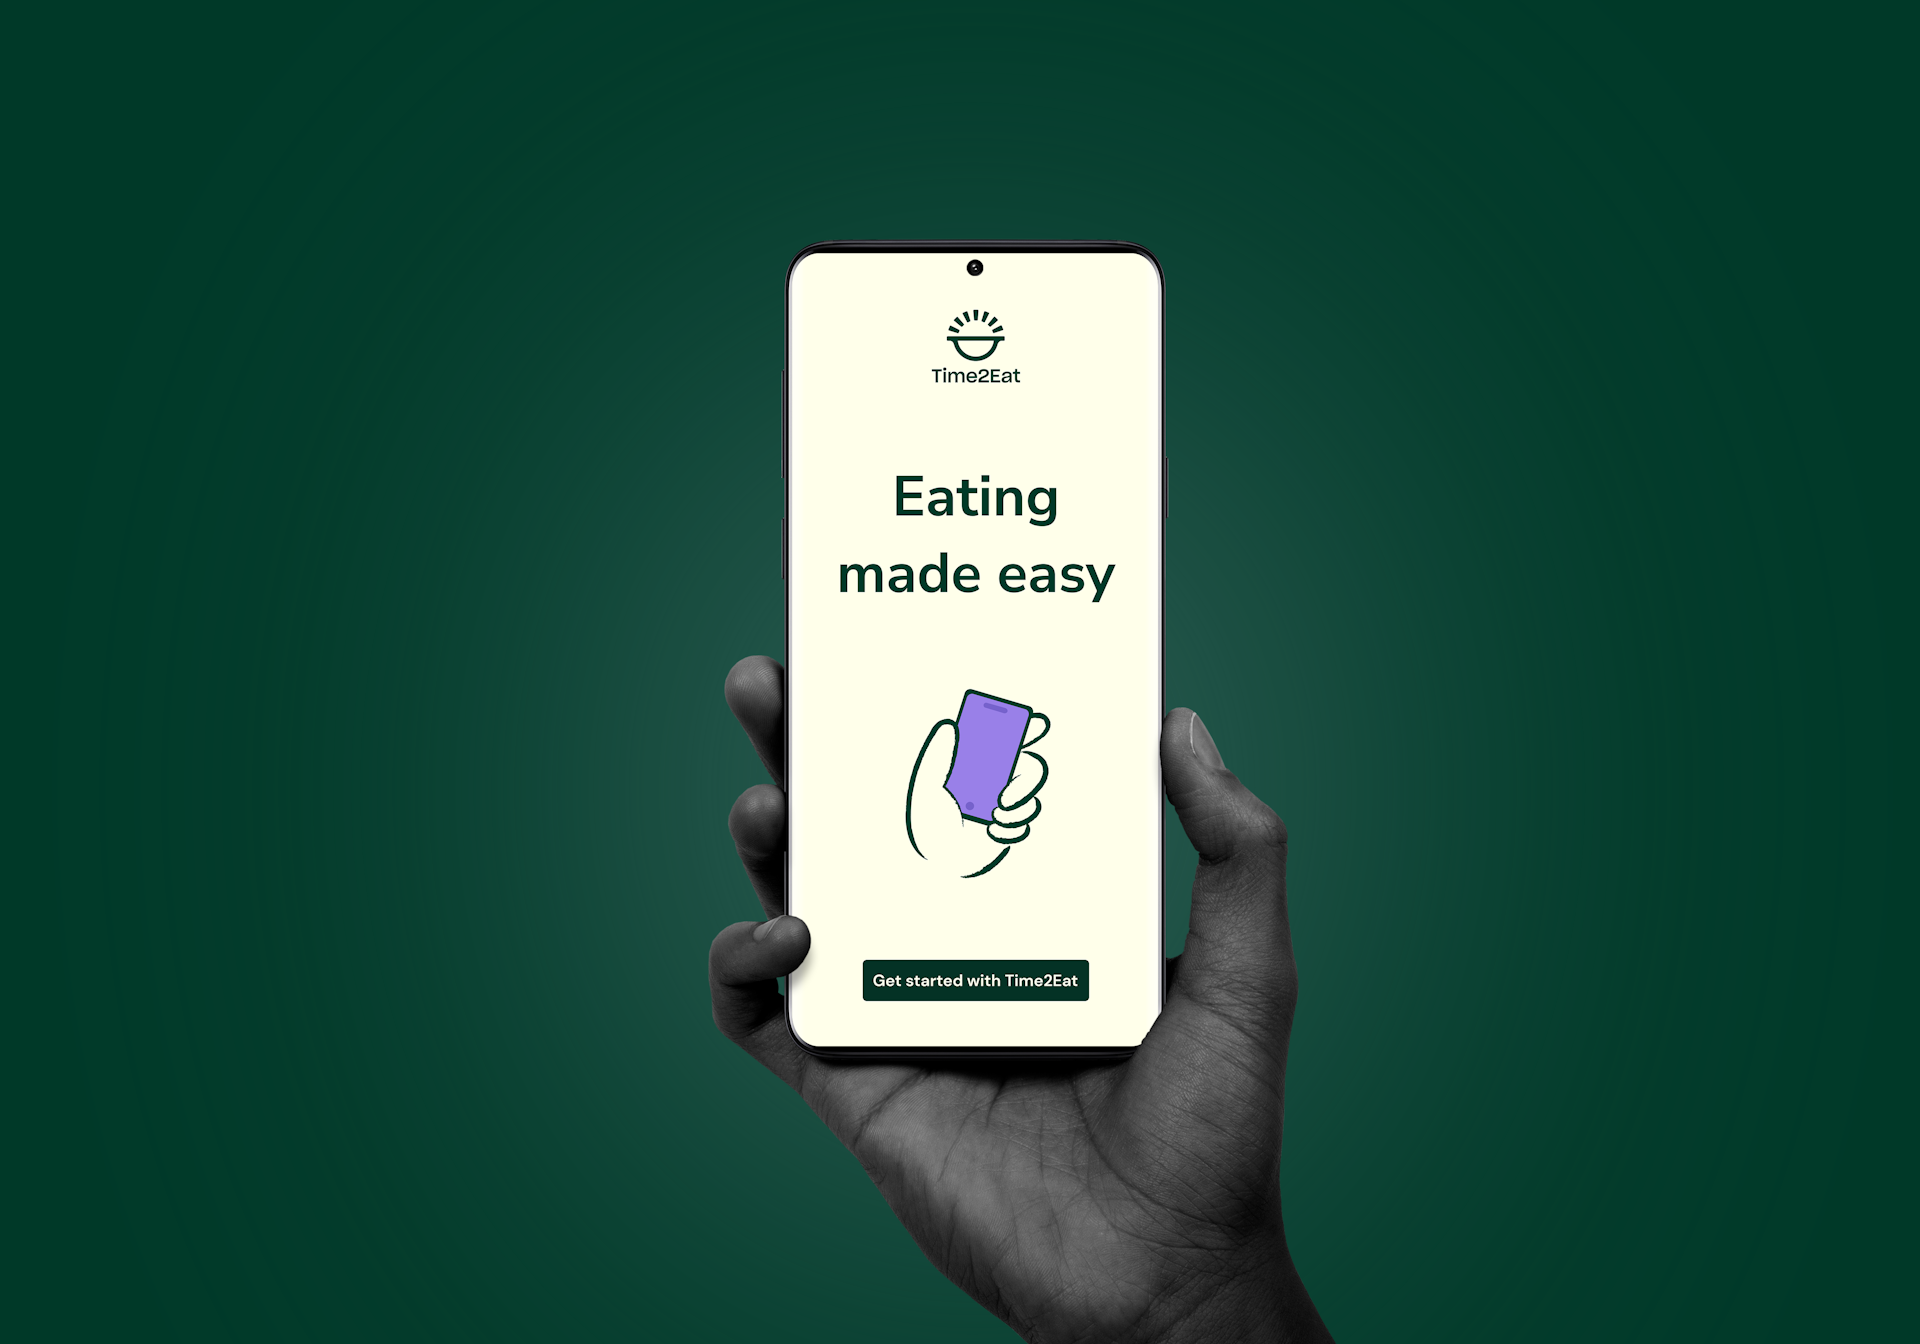 A hand holding up a smartphone showing an app launch screen that read "Eating made easy"